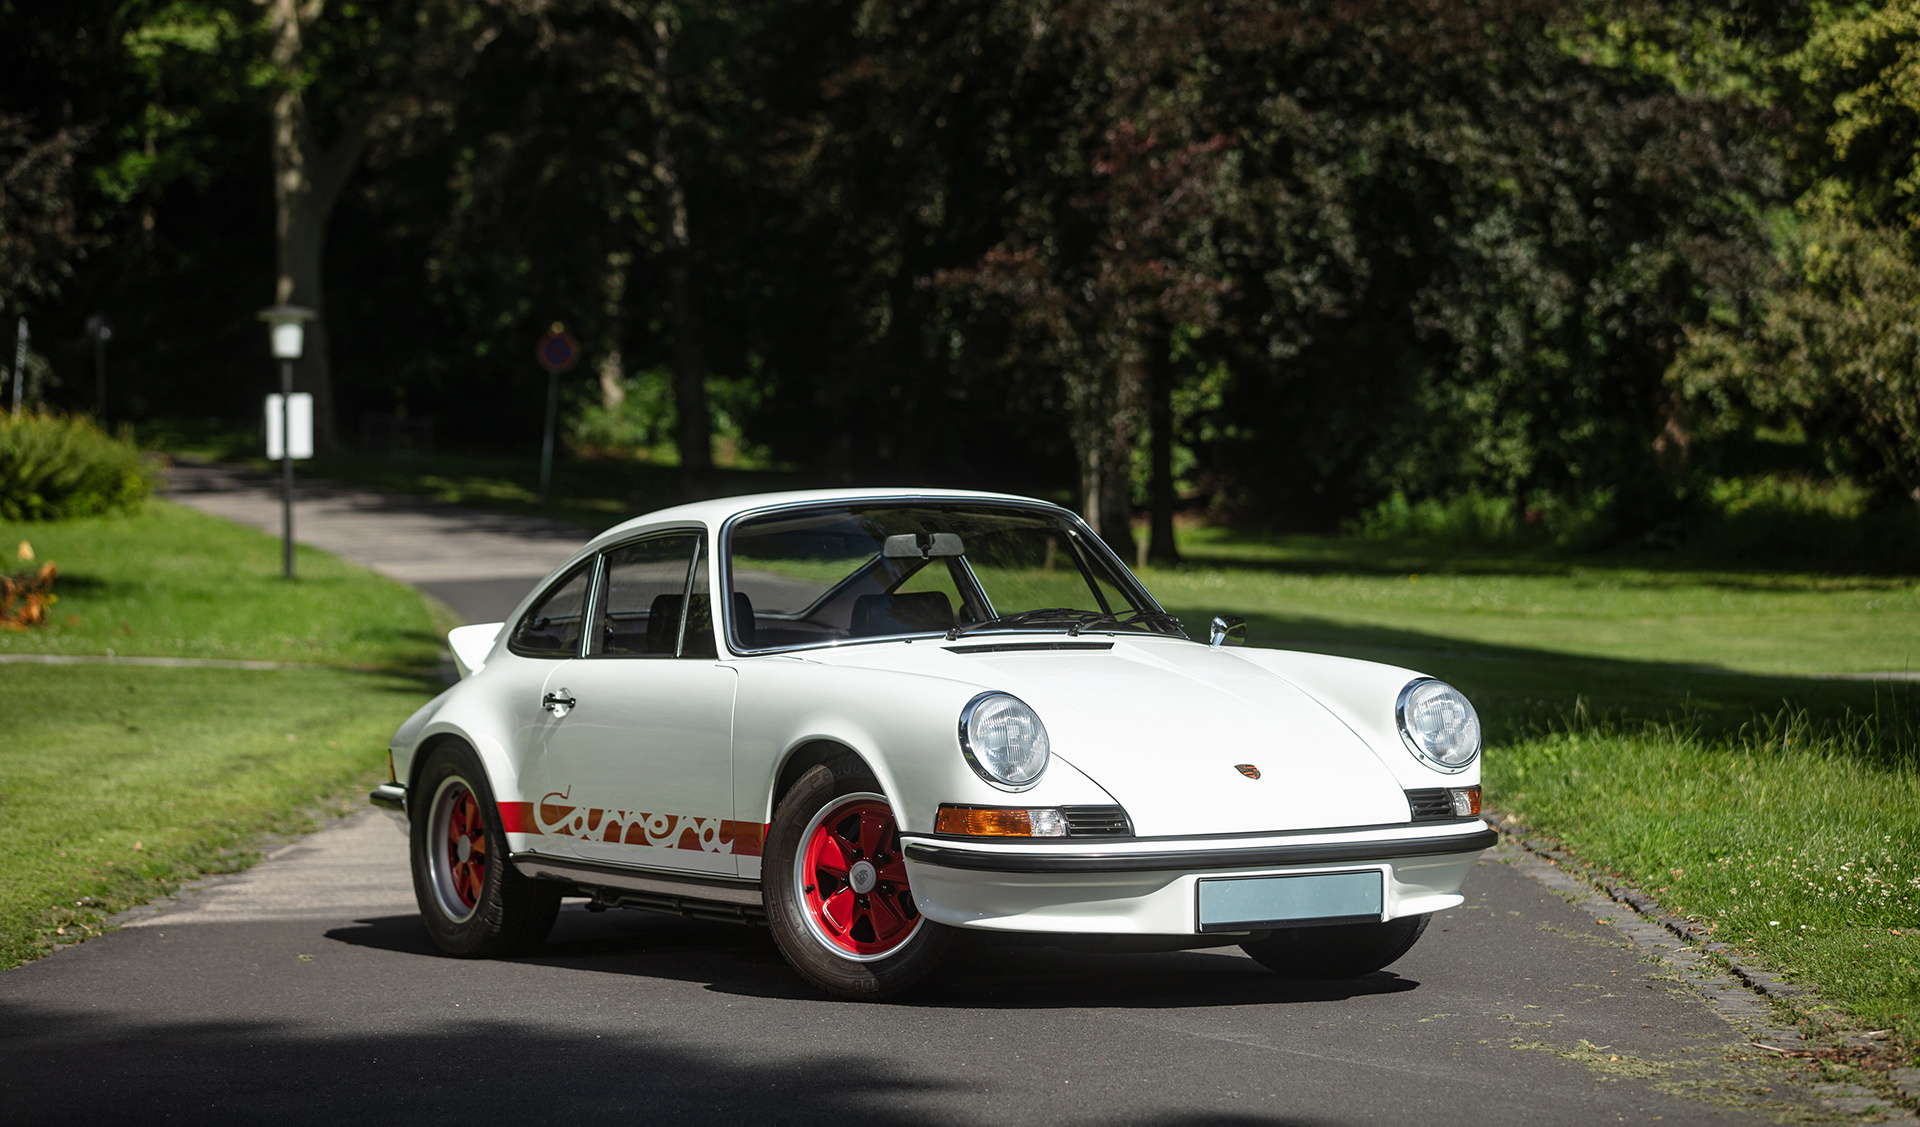 1973 Porsche 911 Carrera RS 2.7 Touring offered at RM Sotheby's St. Moritz Live Auction 2021